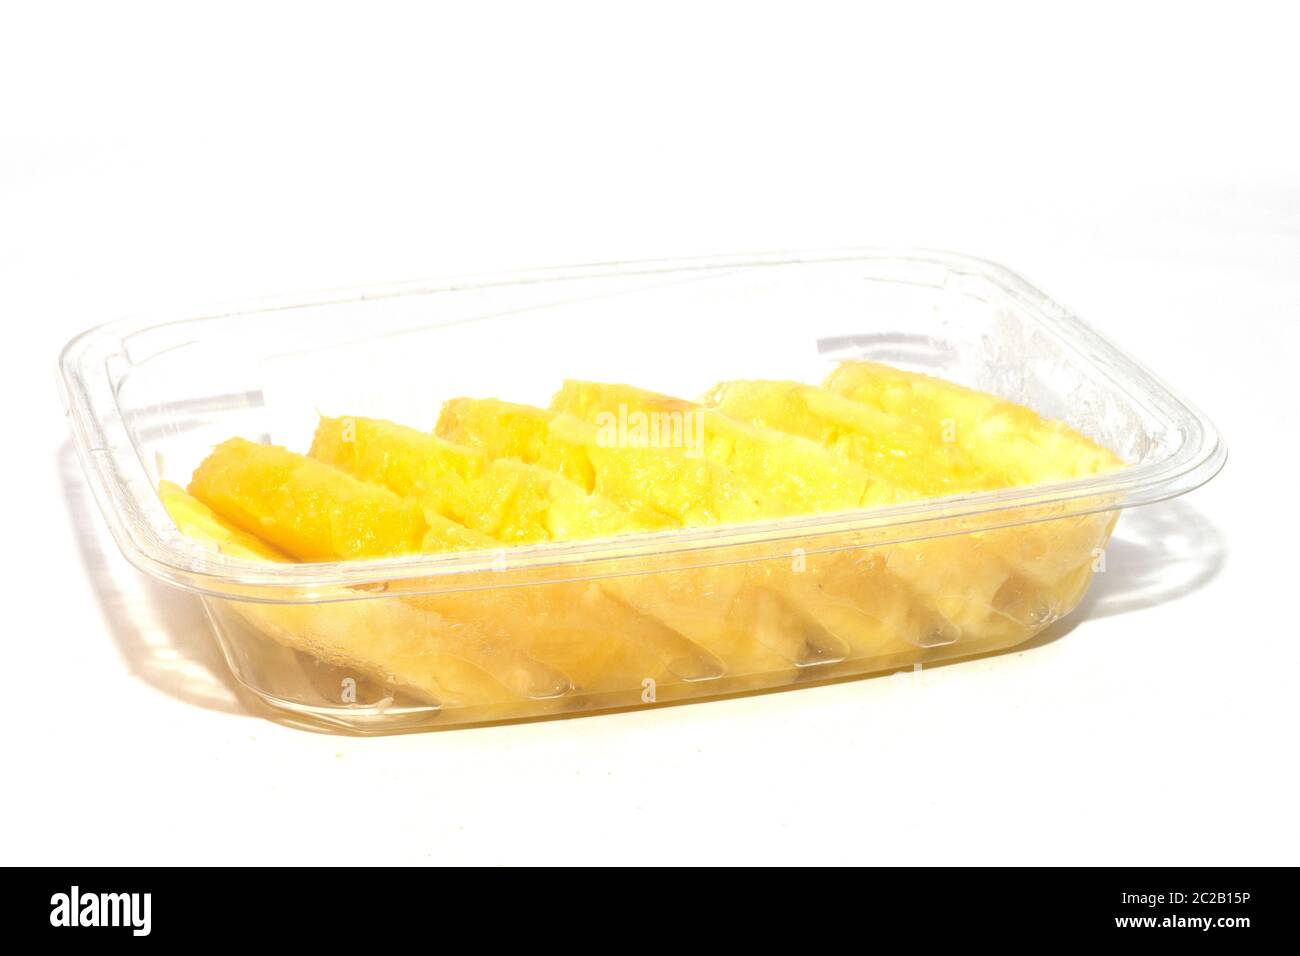 pineapple in a pan cut into slices Stock Photo